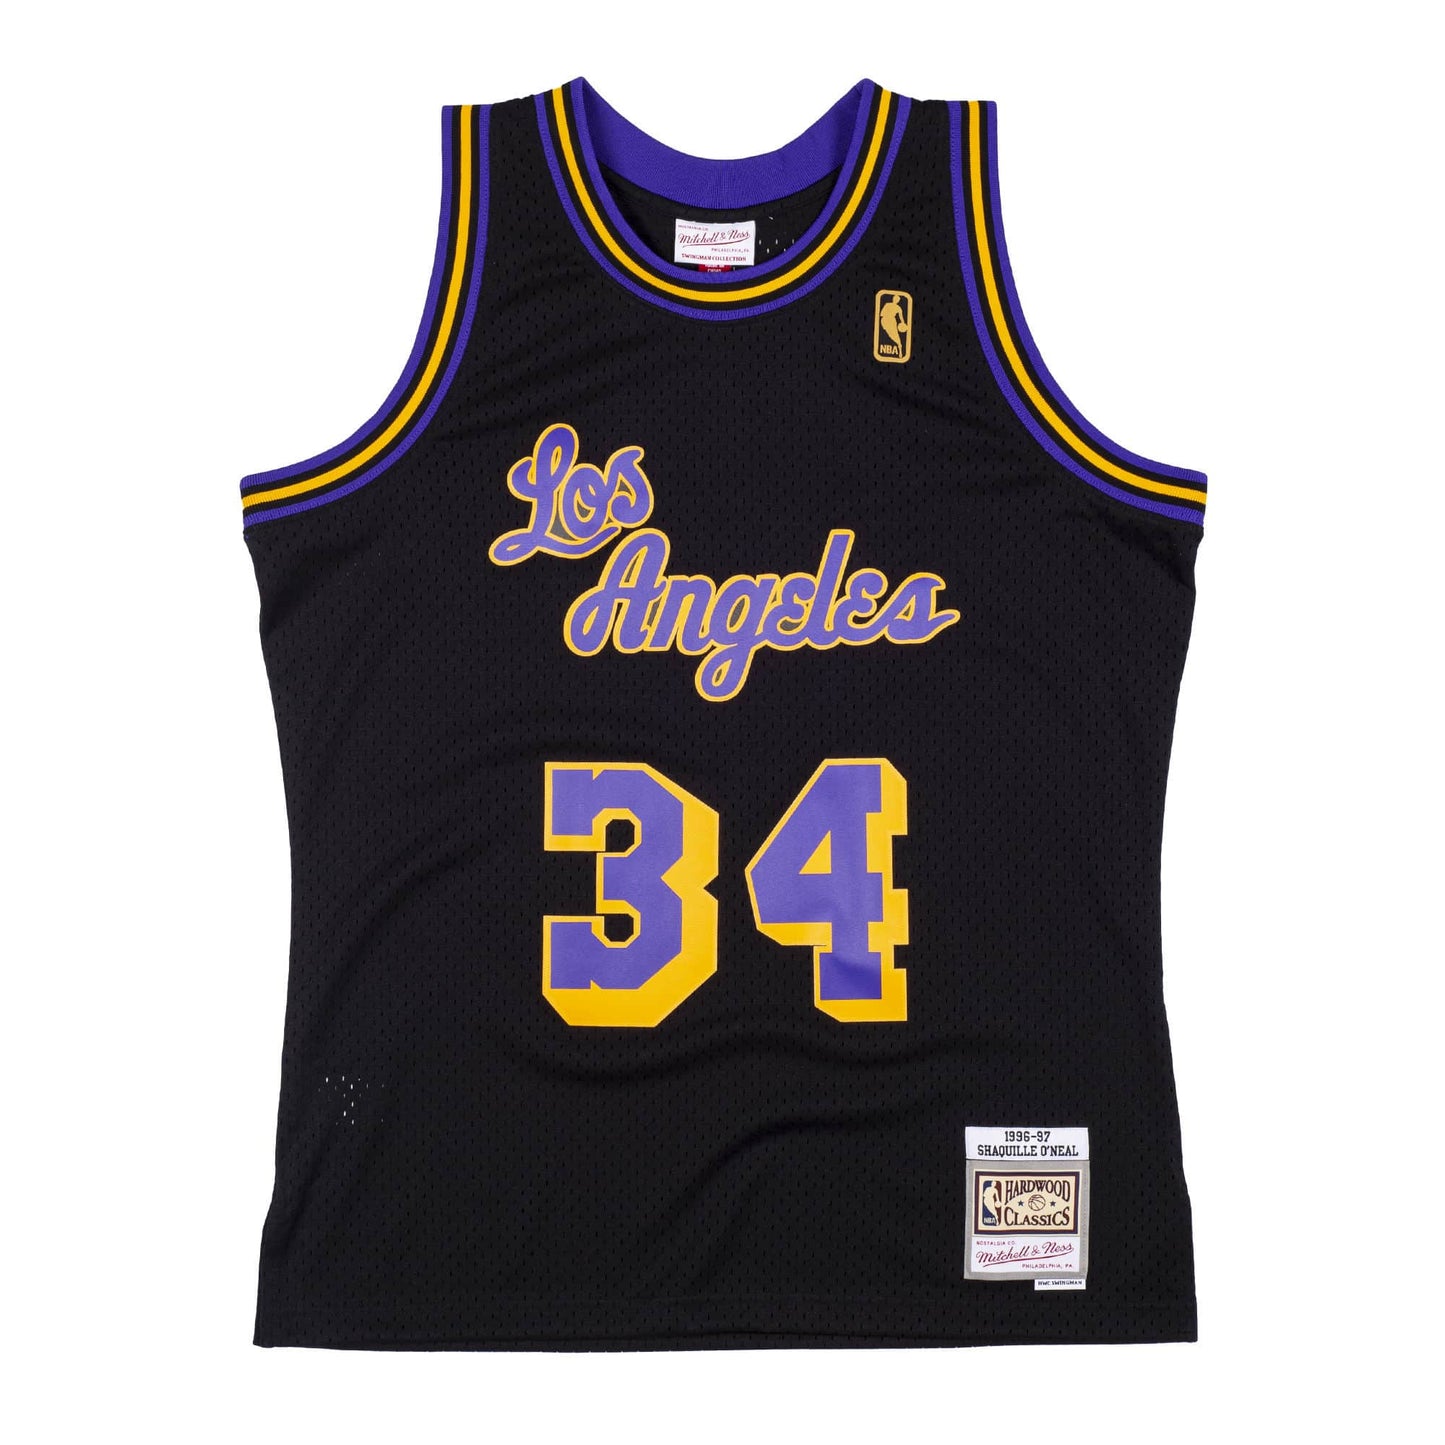 SHAQUILLE O'NEAL MEN'S LOS ANGELES LAKERS MITCHELL & NESS RELOAD 1996-97 SWINGMAN JERSEY